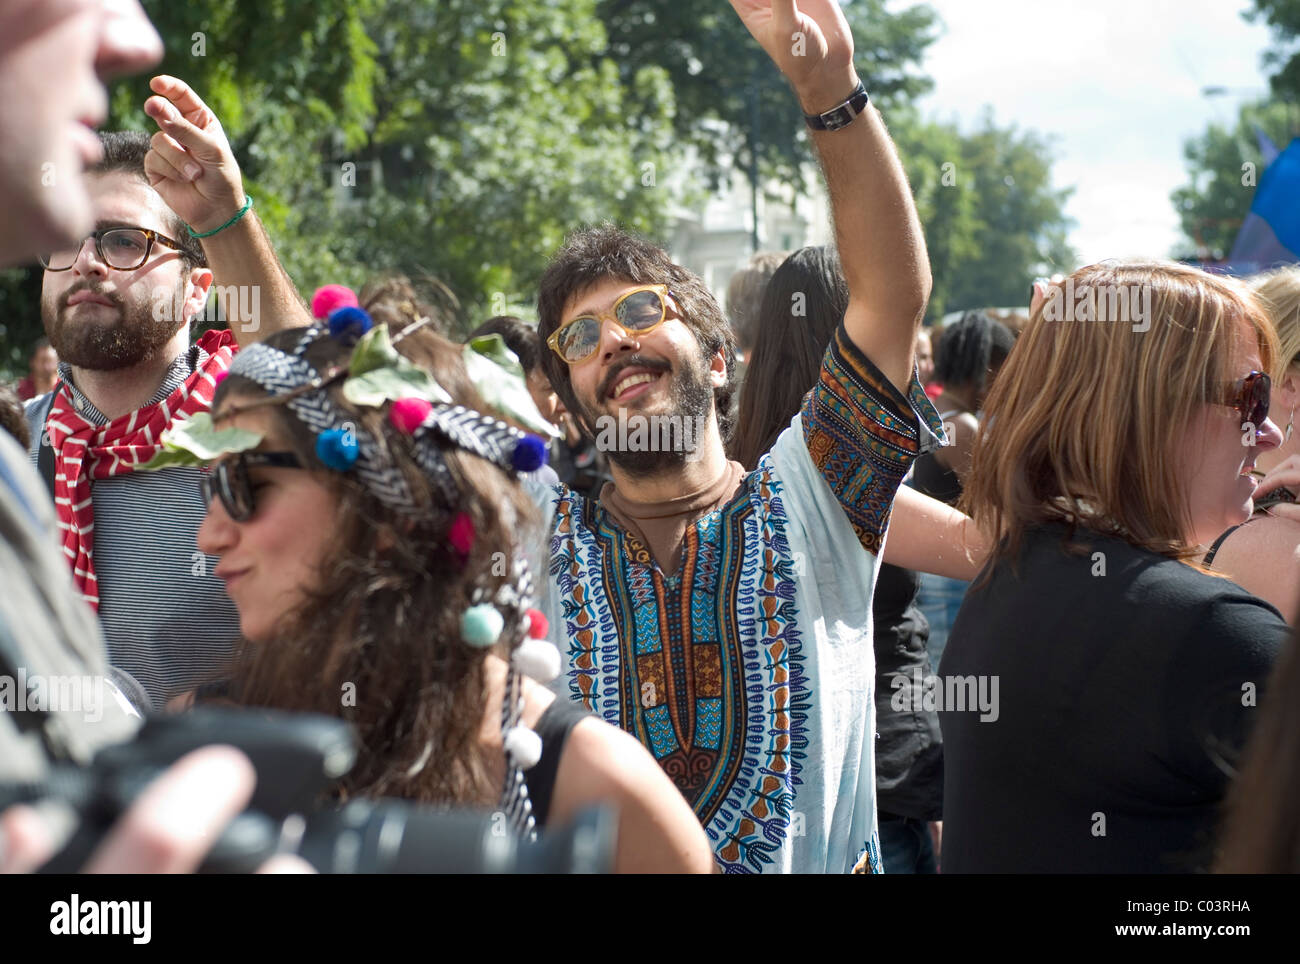 Man dancing in the street at the Notting Hill Carnival, London 2010, wearing 70's flowery shirt Stock Photo